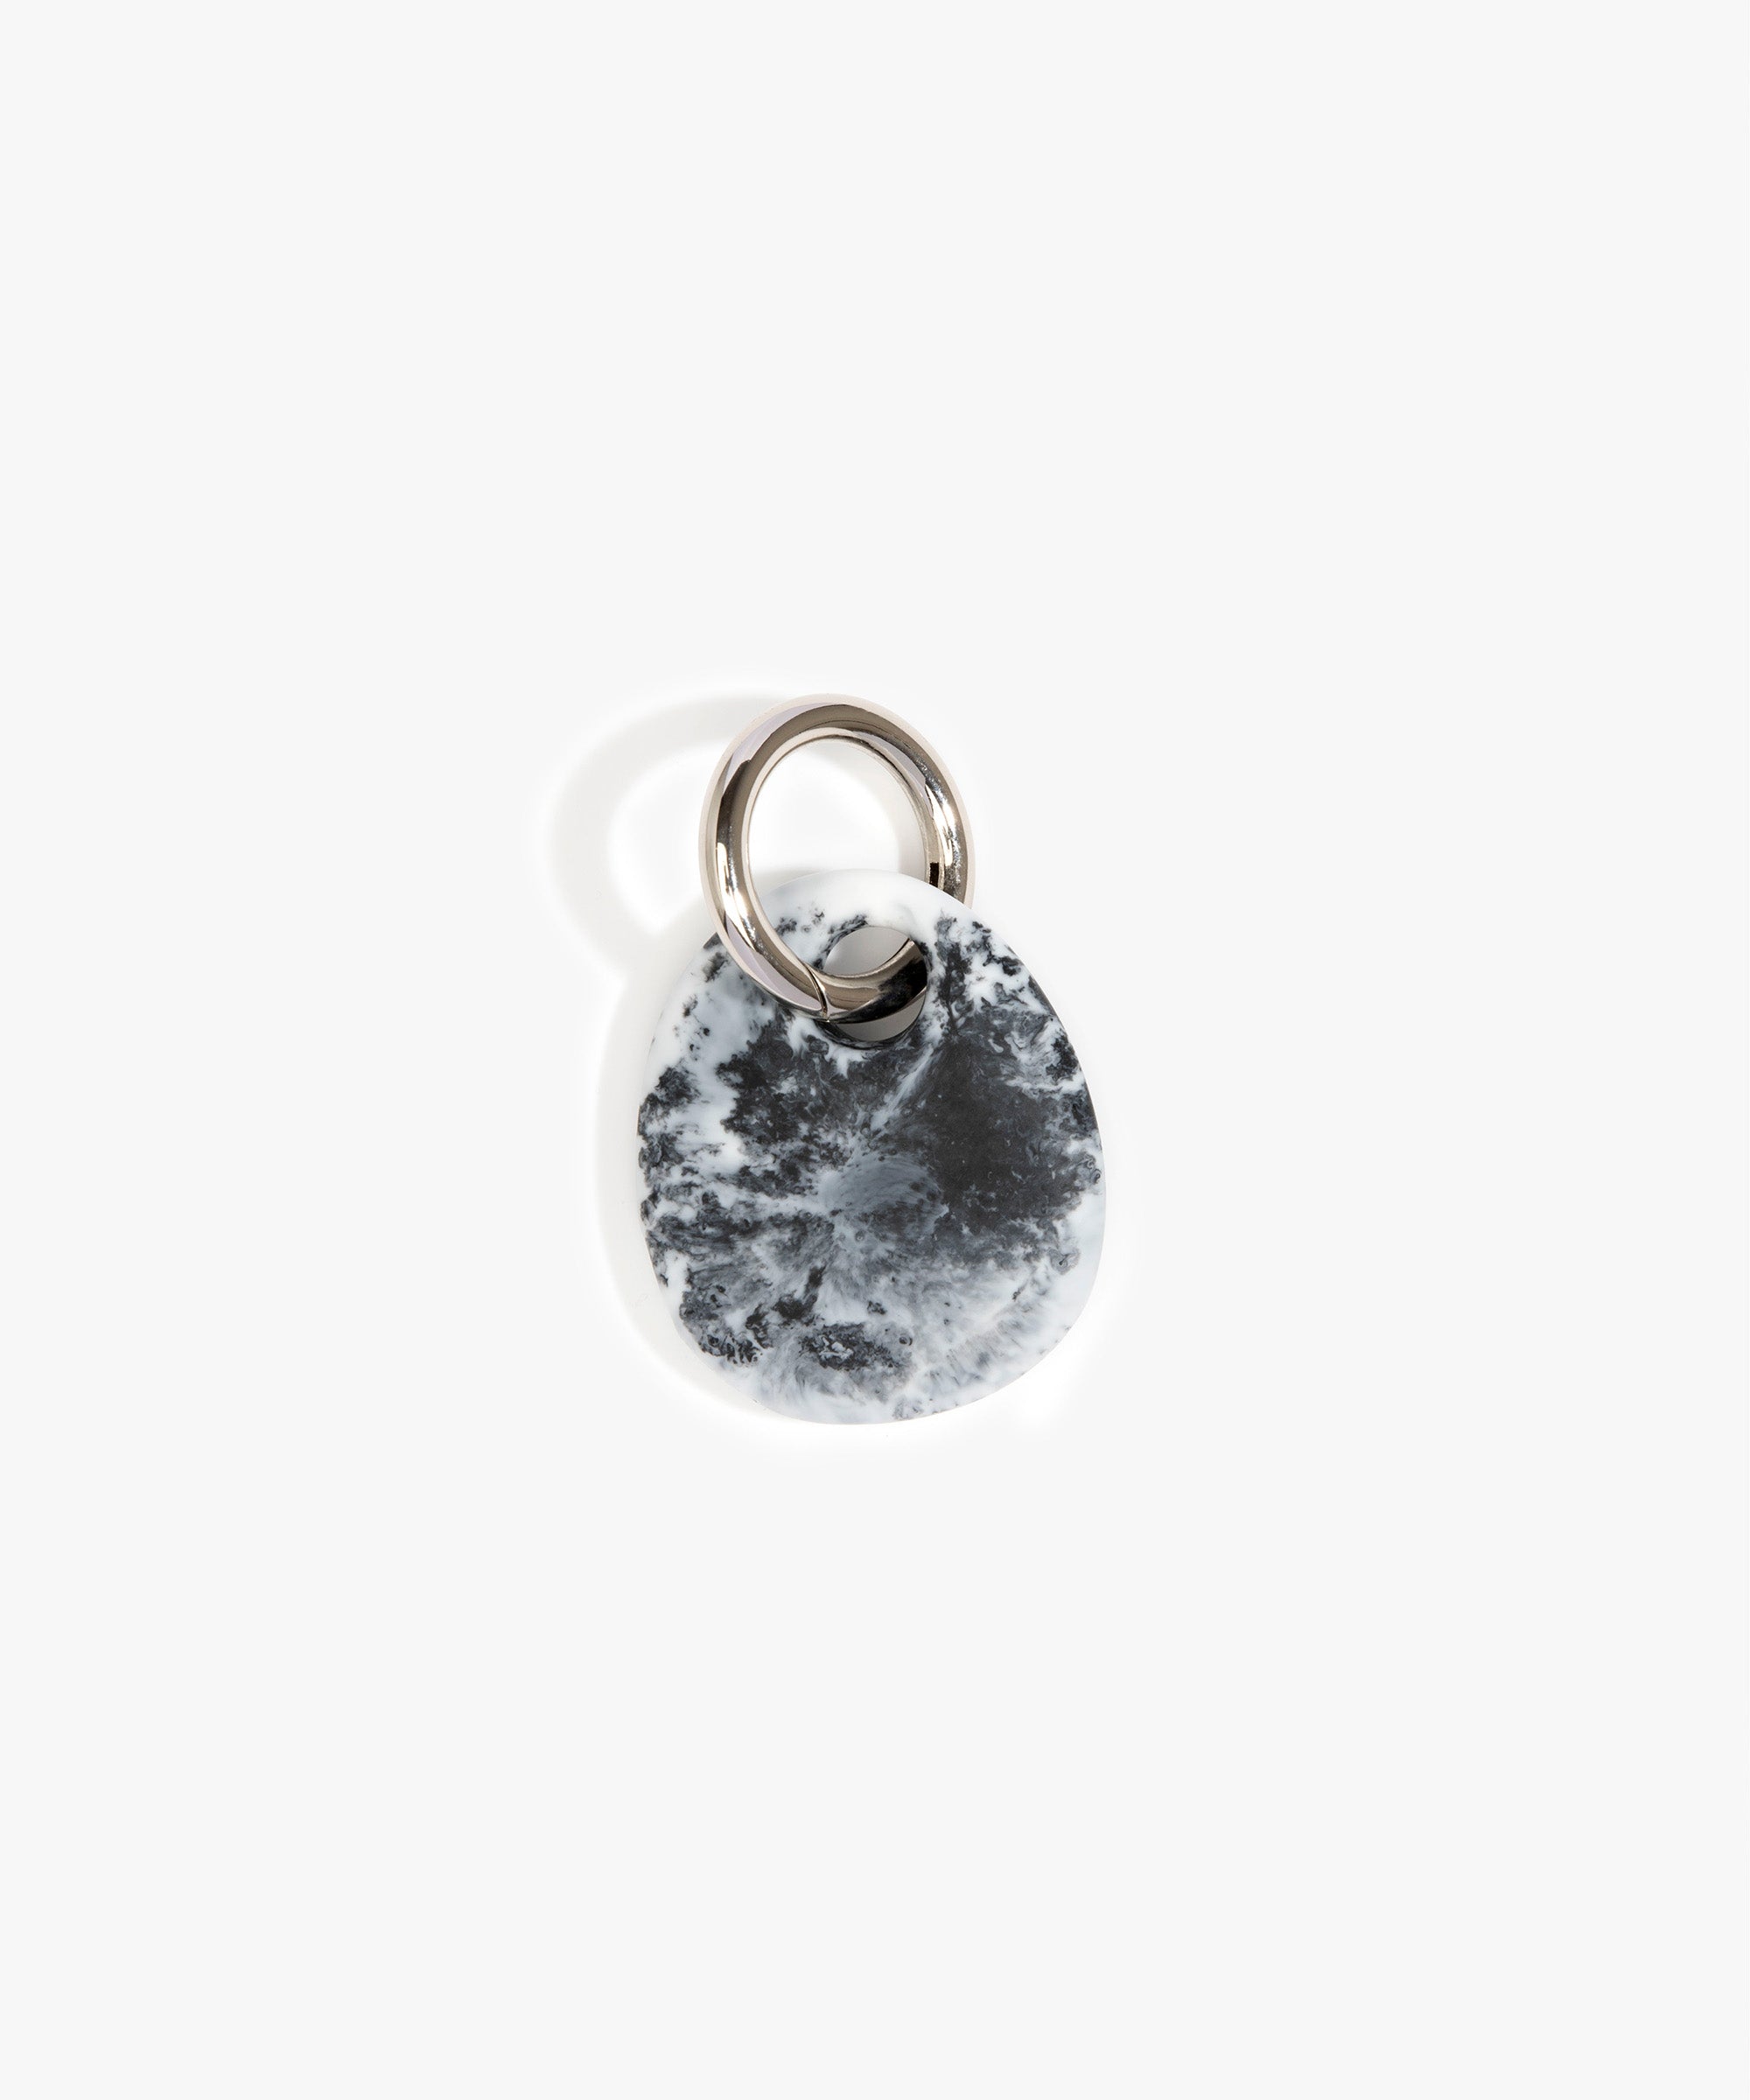 Dinosaur Designs Earth Keyring Keychains in White Marble color resin with Gunmetal Metal